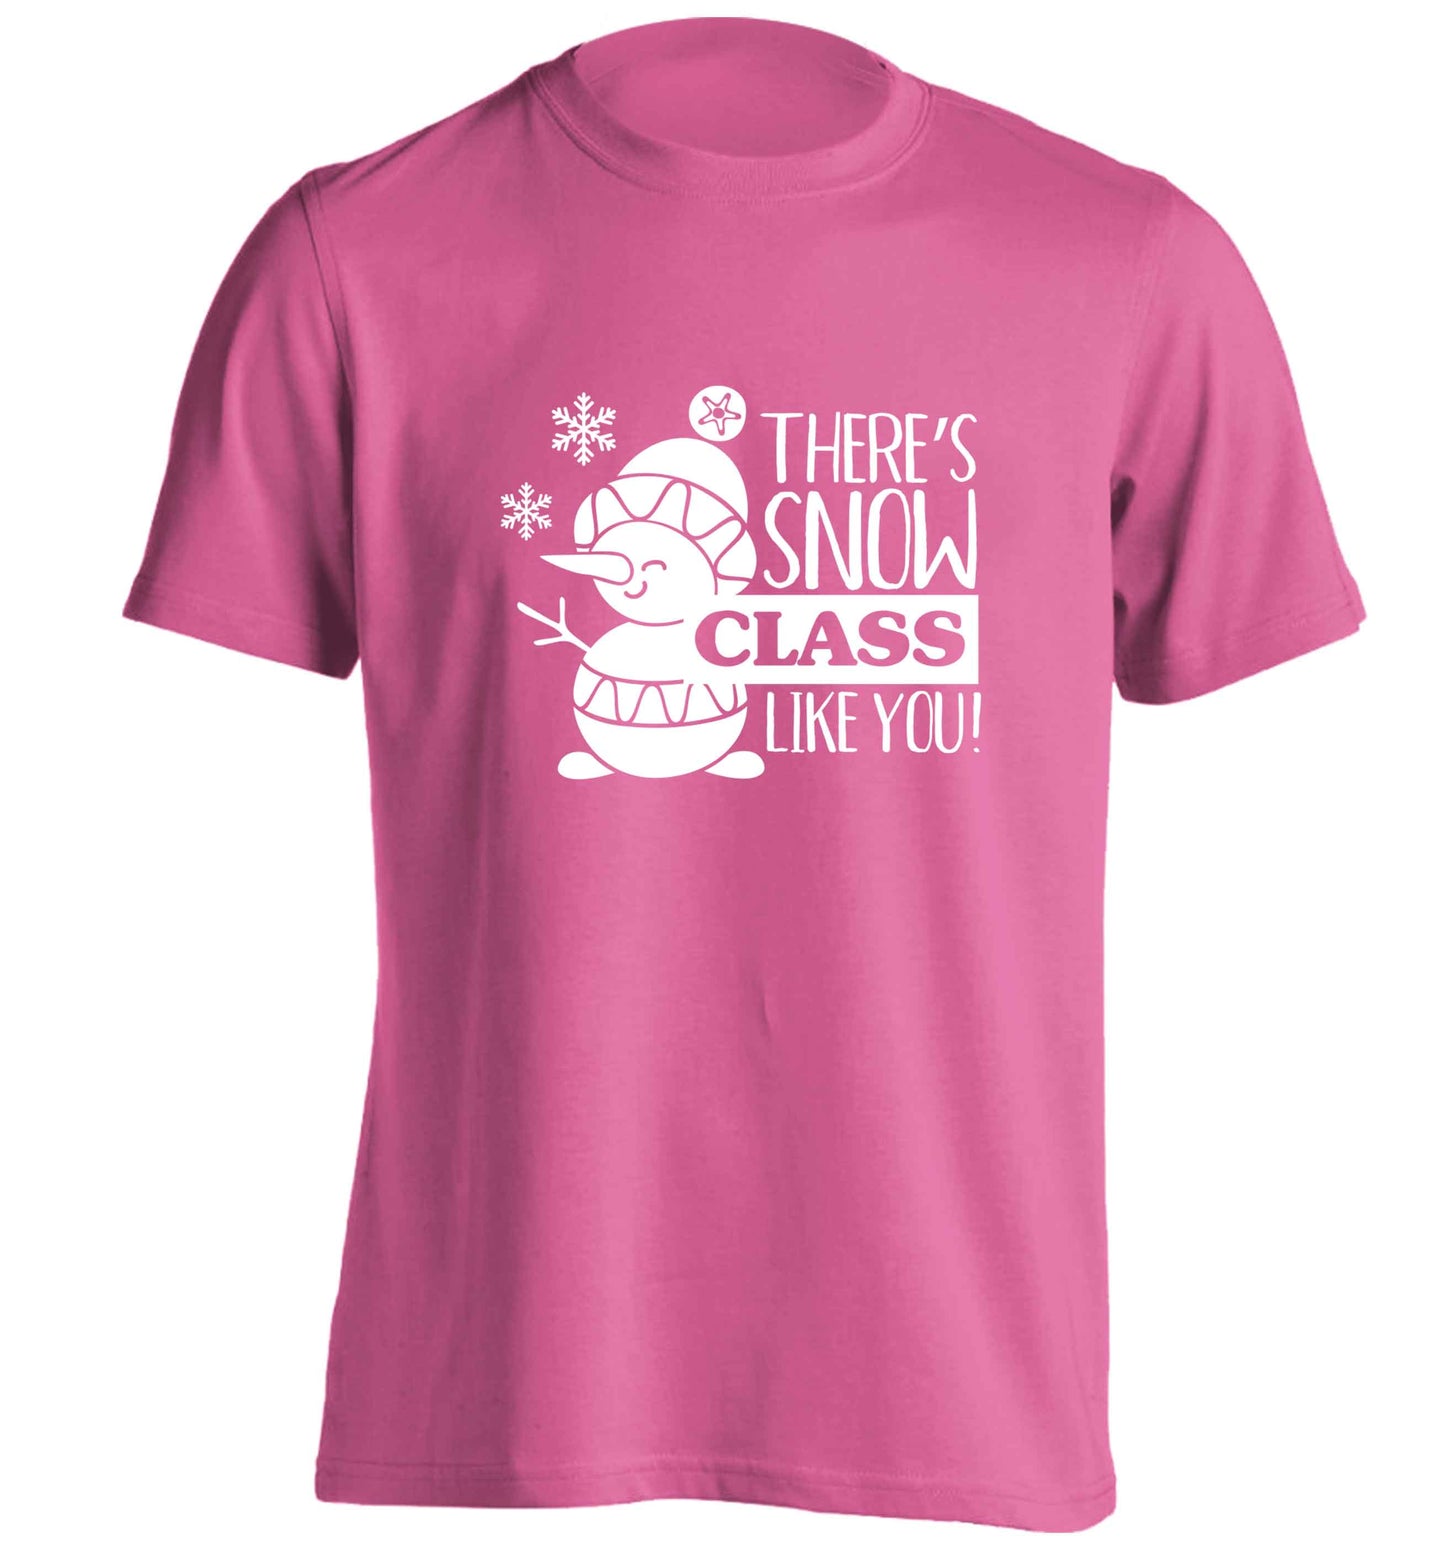 There's snow class like you adults unisex pink Tshirt 2XL